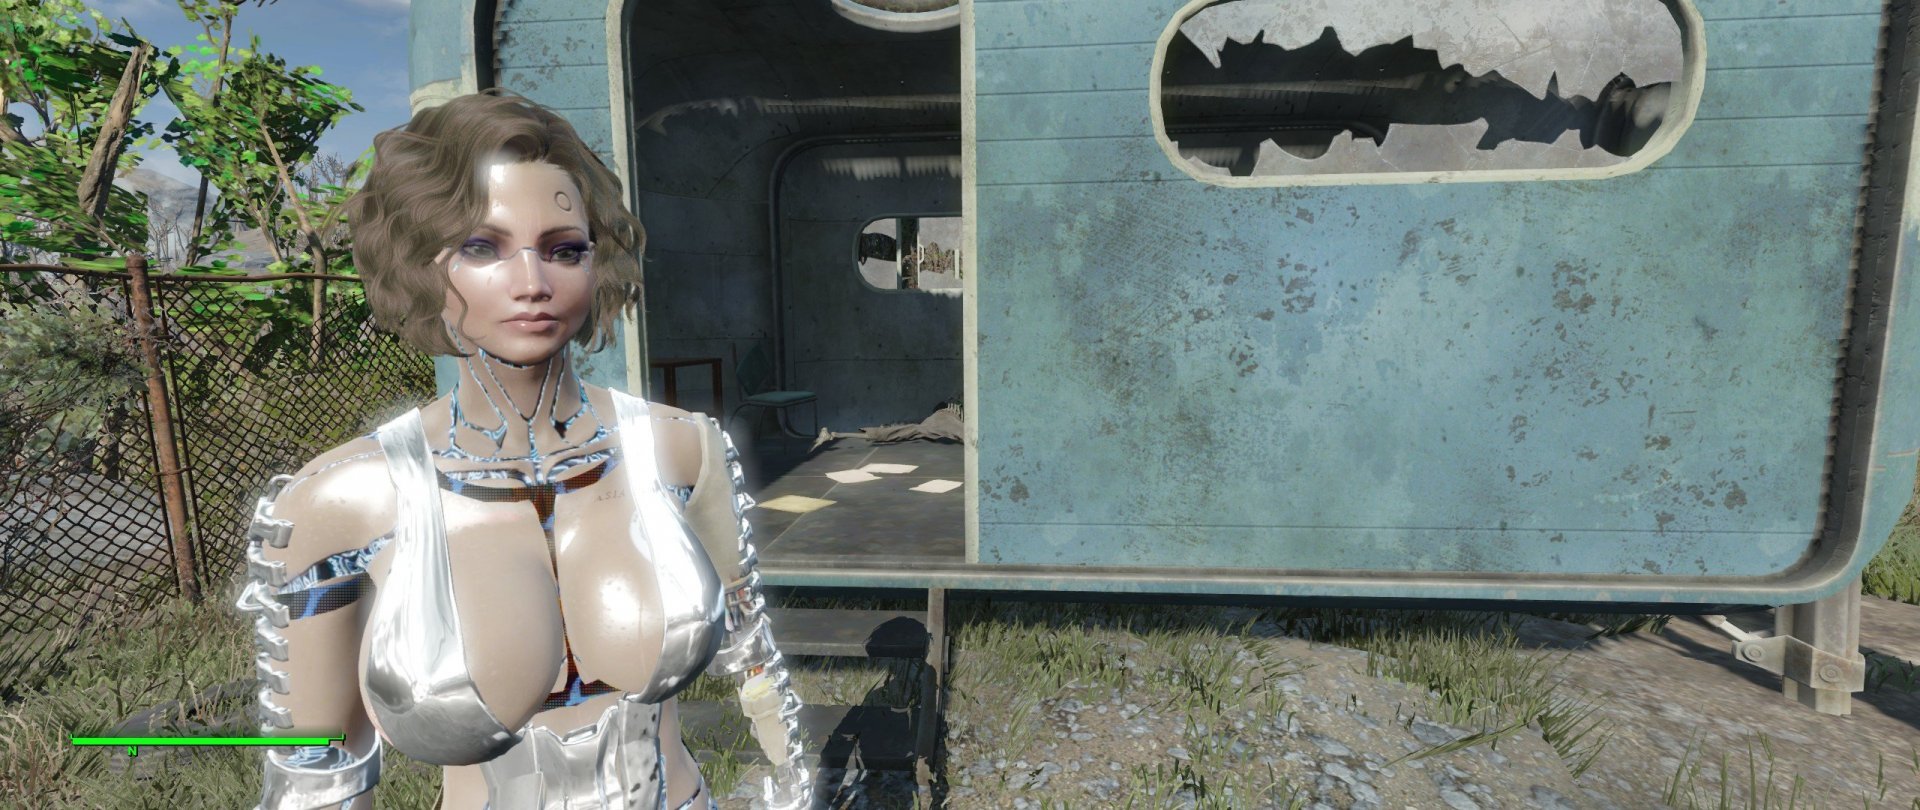 Deviously cursed wasteland fallout 4 фото 10